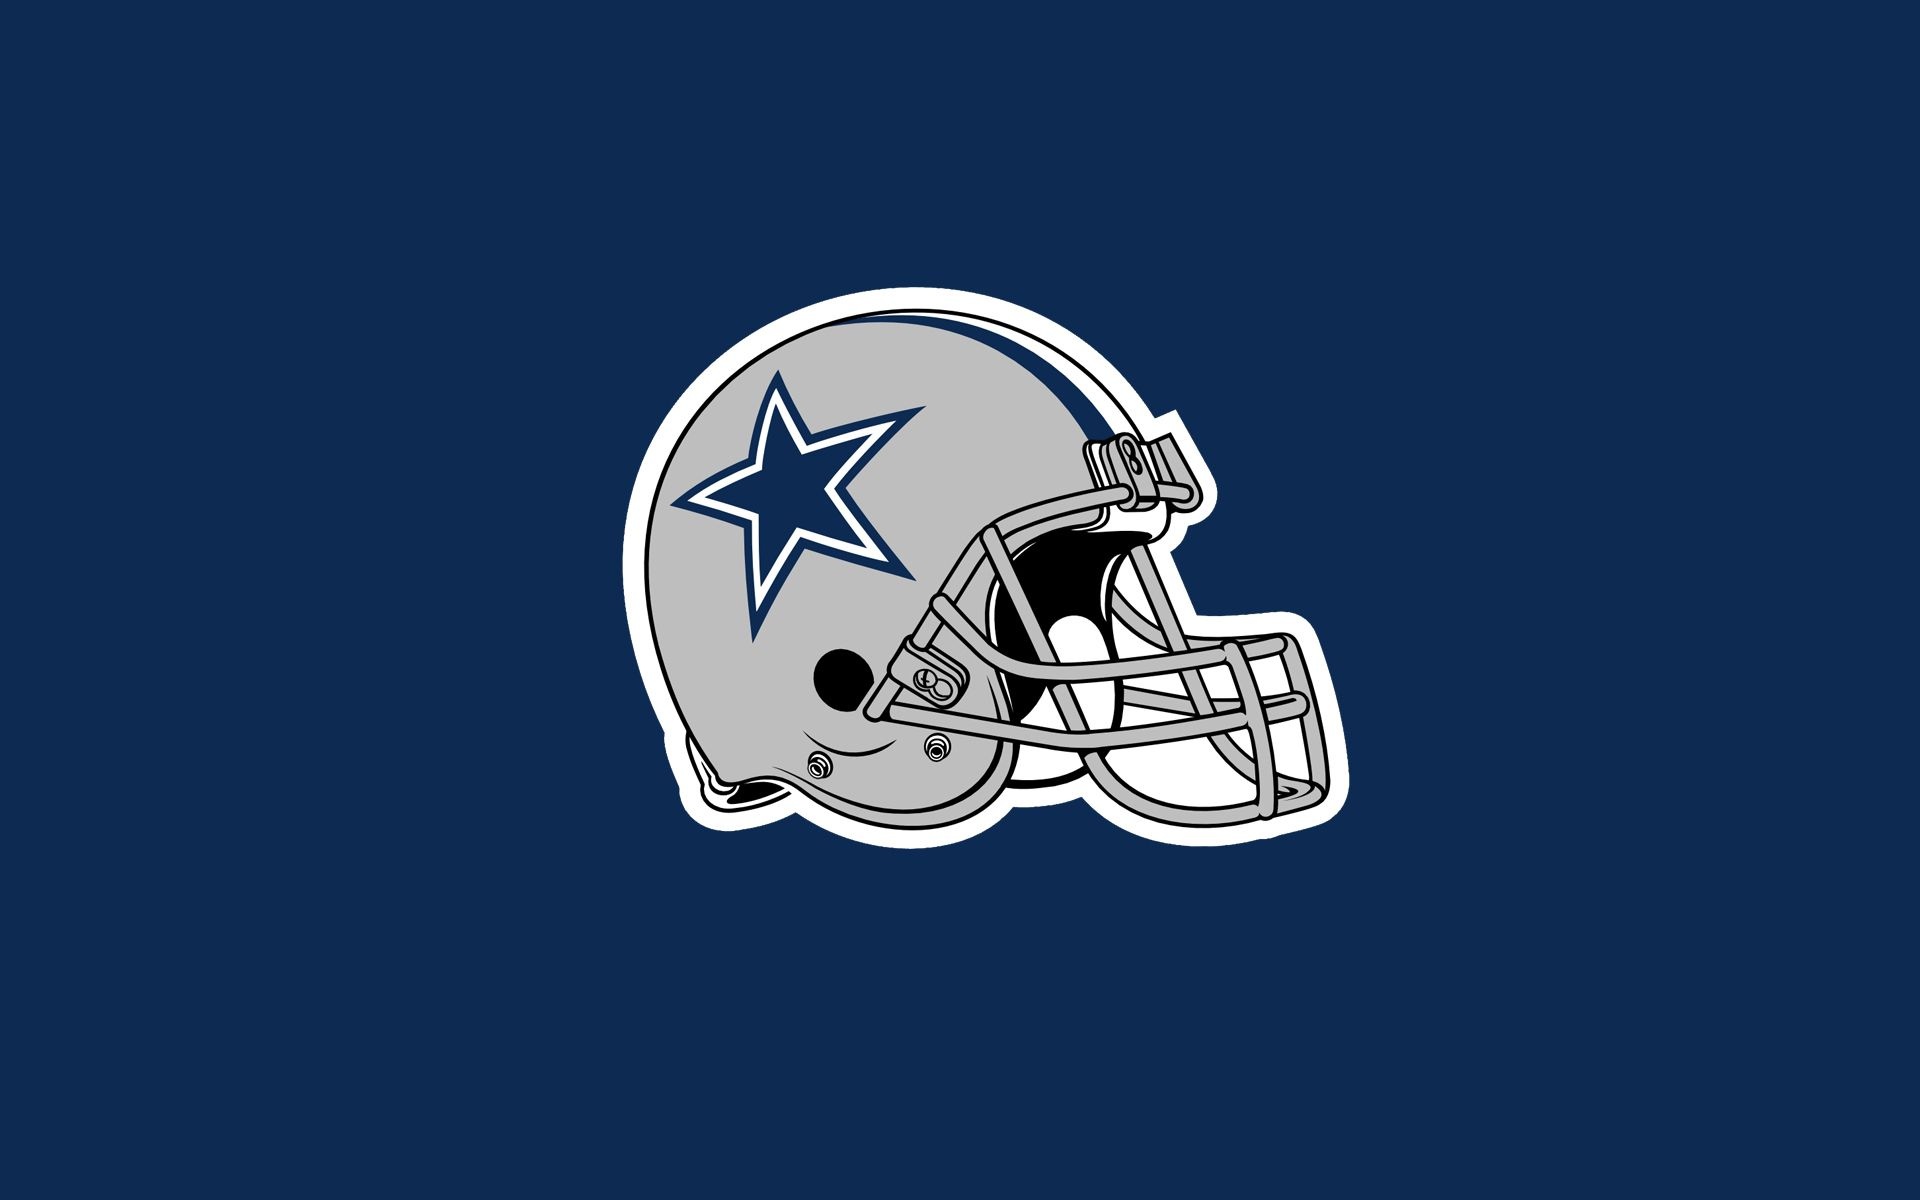 Dallas Cowboys: The team logo is a blue star with a white border on a silver helmet. 1920x1200 HD Wallpaper.